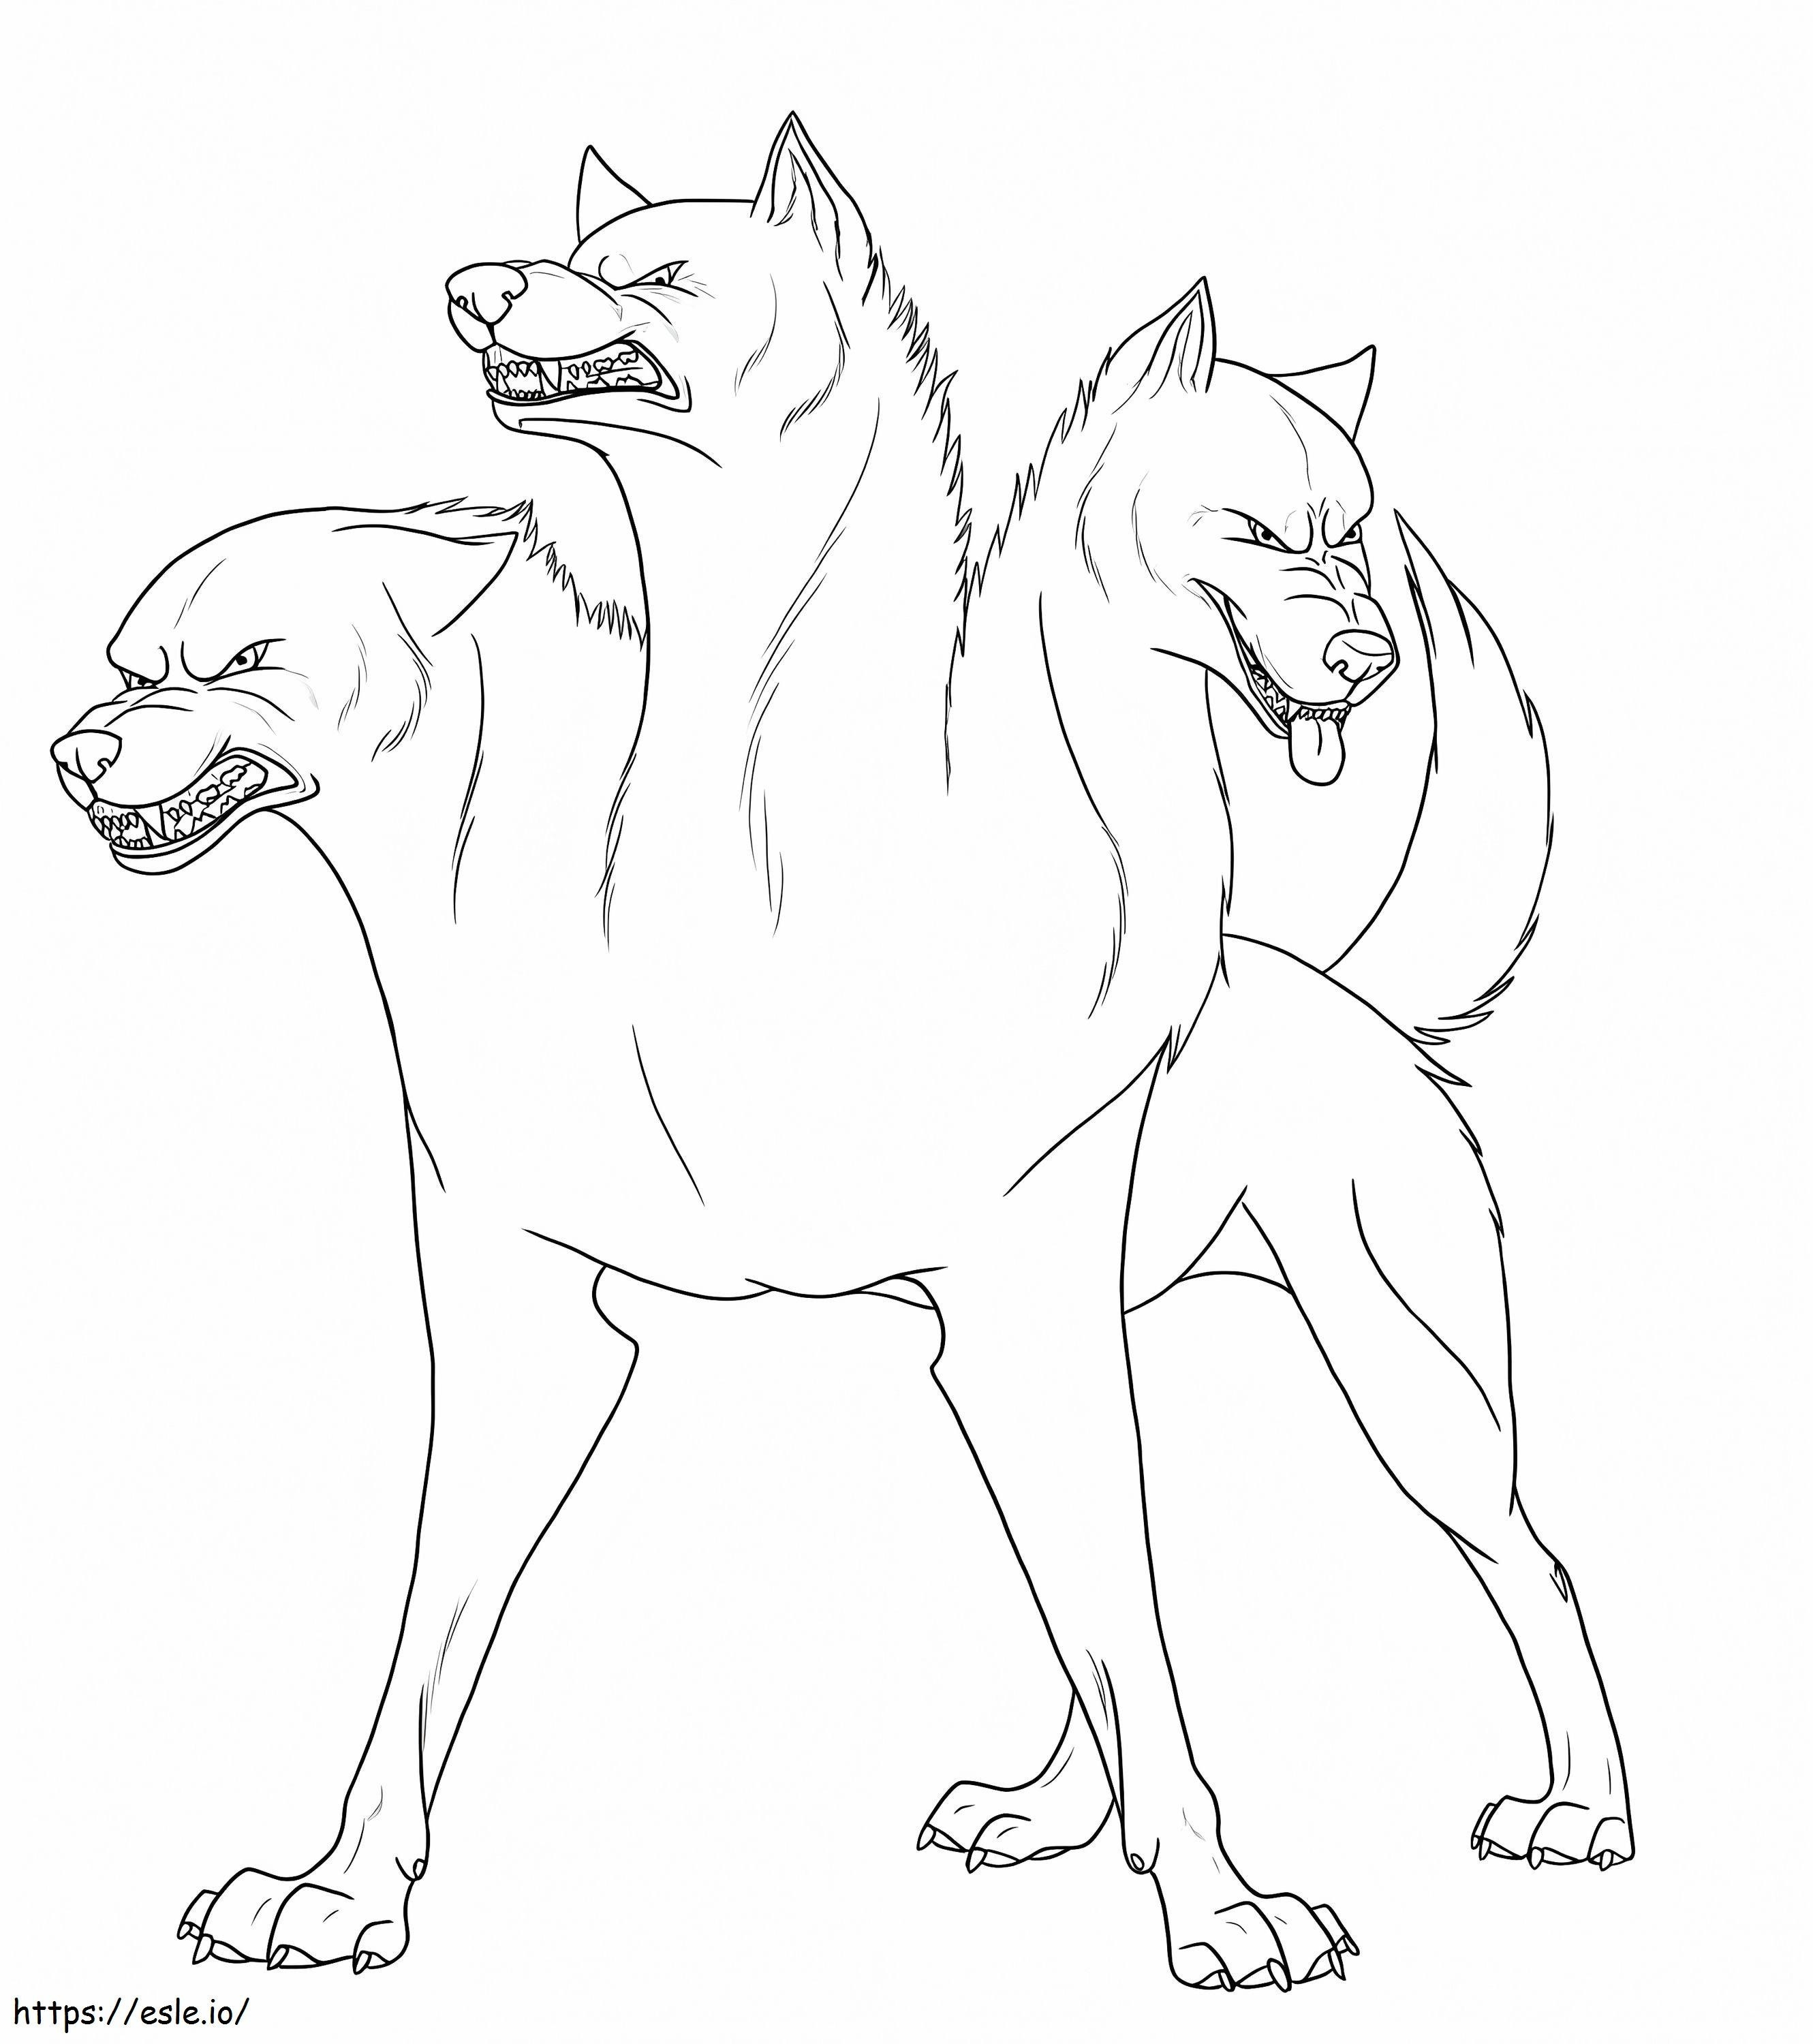 Angry Cerberus coloring page